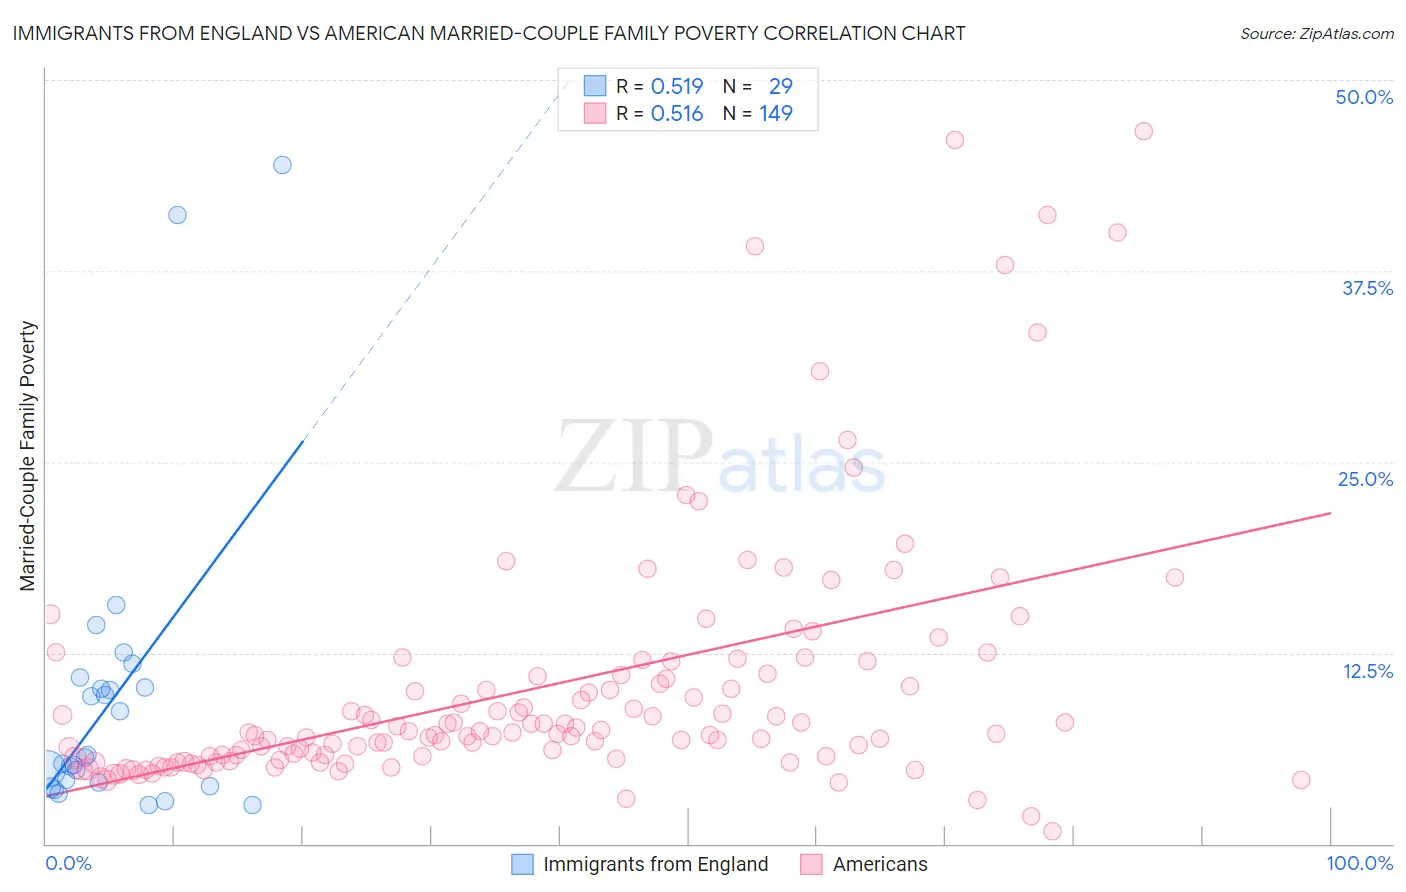 Immigrants from England vs American Married-Couple Family Poverty